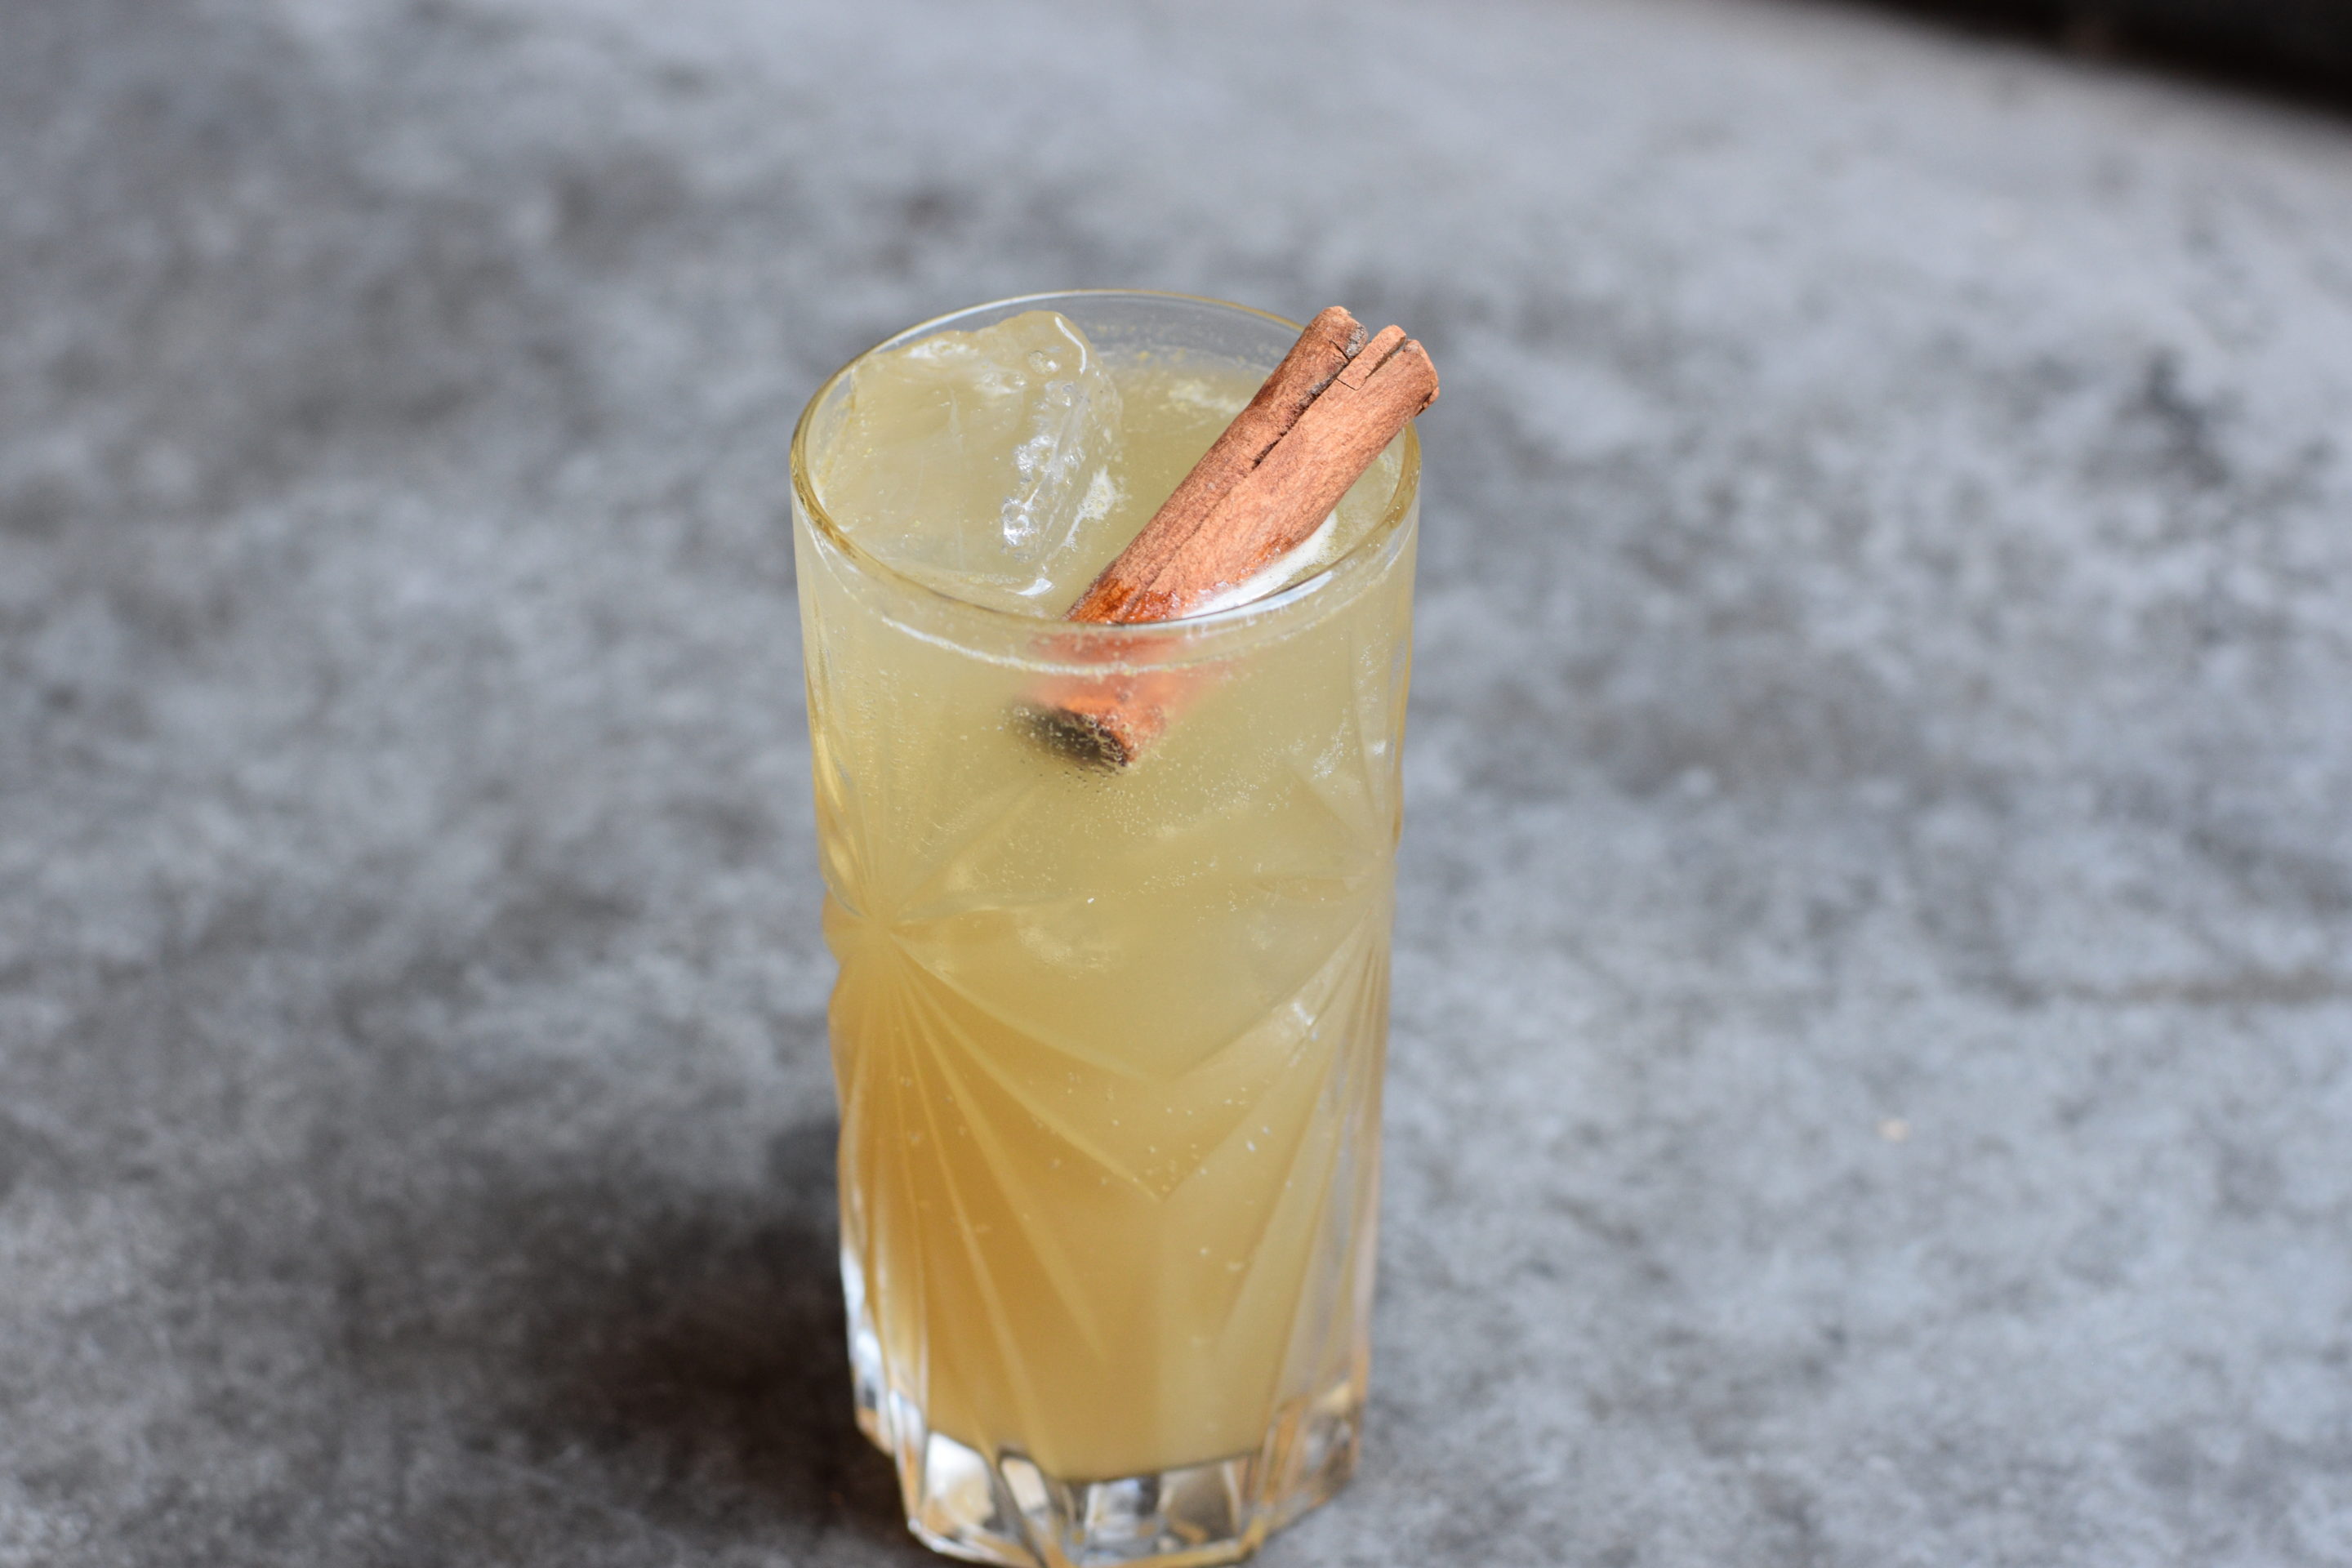 Brown cocktail with a cinnamon stick floating on top